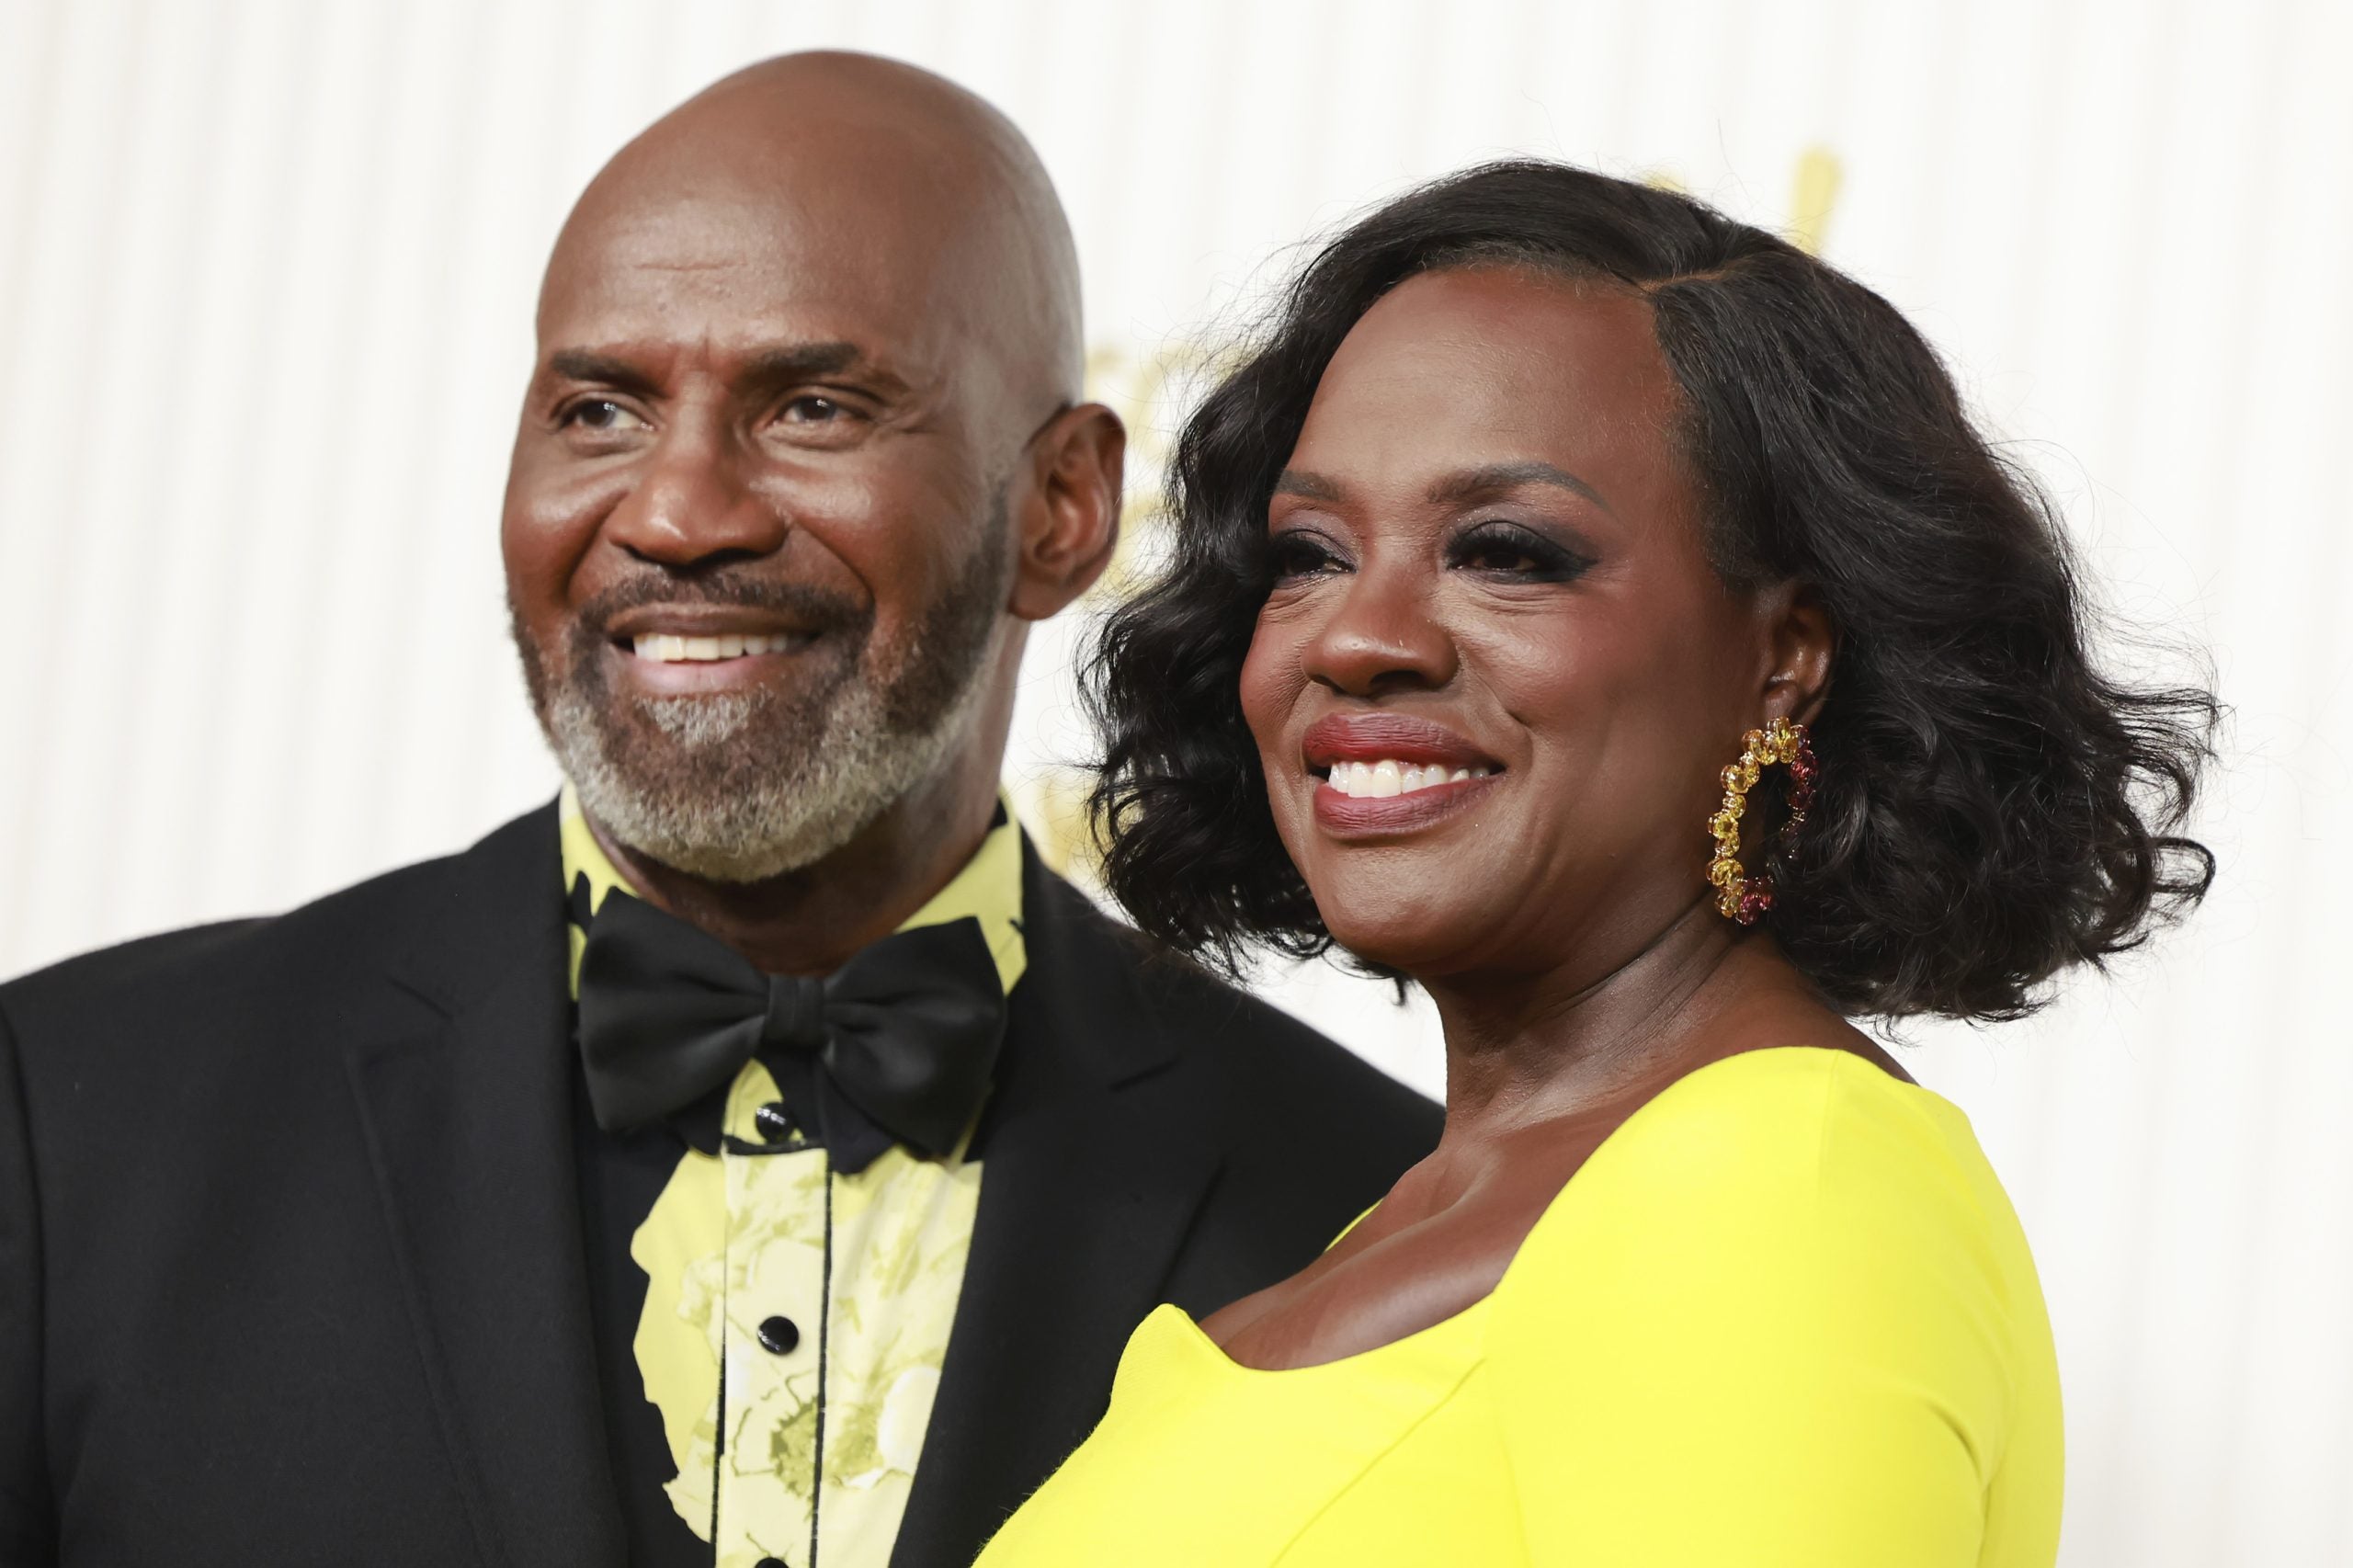 Viola Davis Opens Up About Acting Alongside Her Husband In 'AIR': "It Felt Like Home"